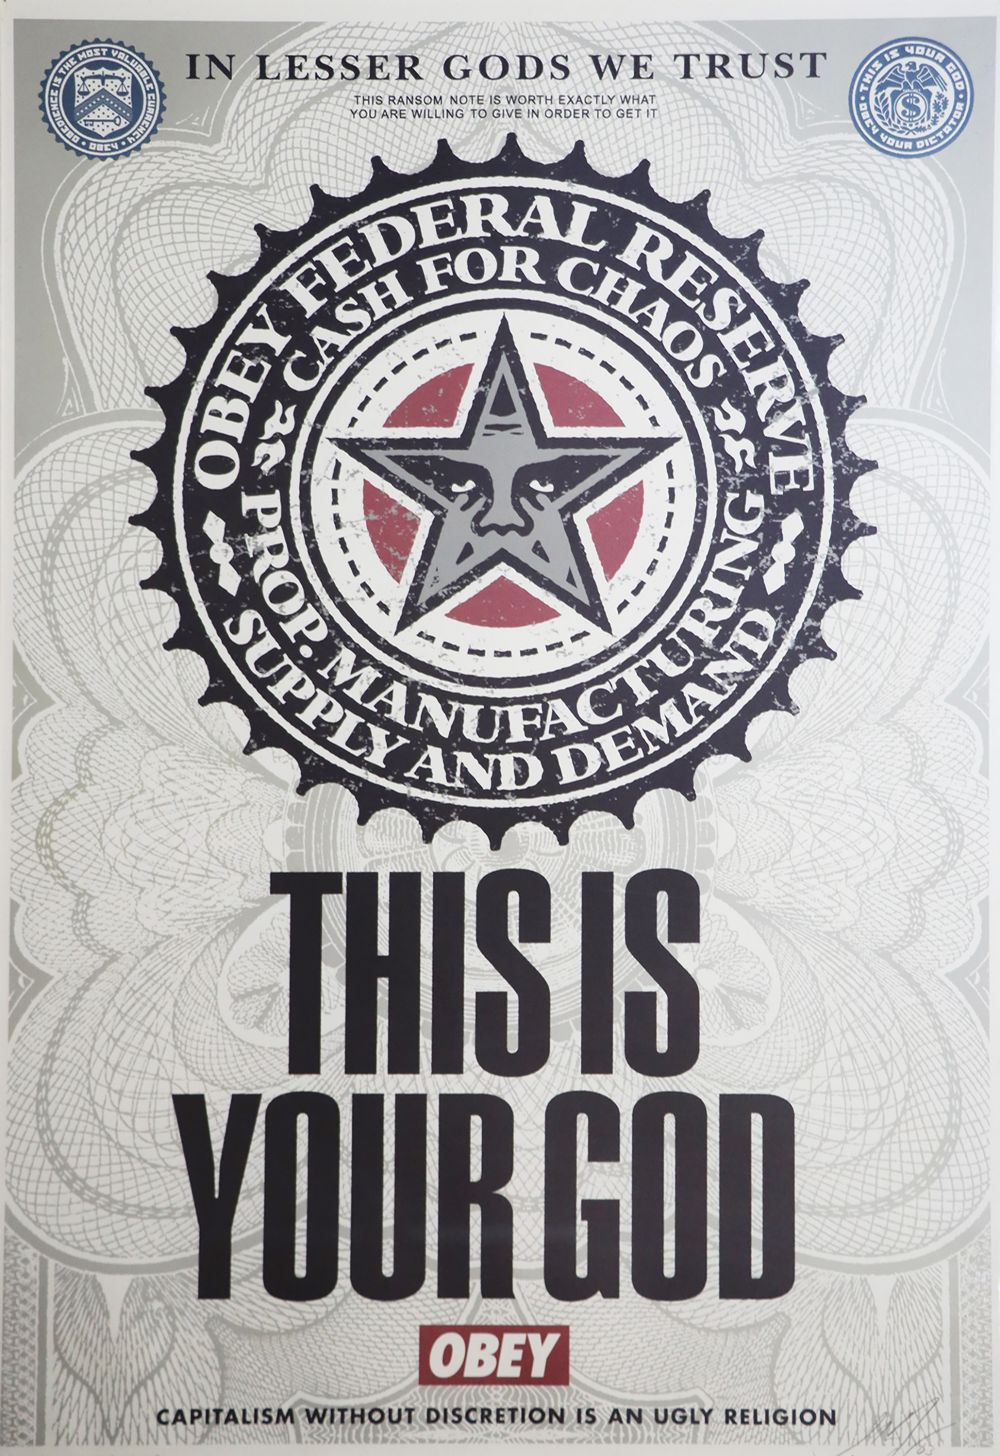 OBEY - THIS IS YOUR GOD by Shepard Fairey sold for €440 at deVeres Auctions